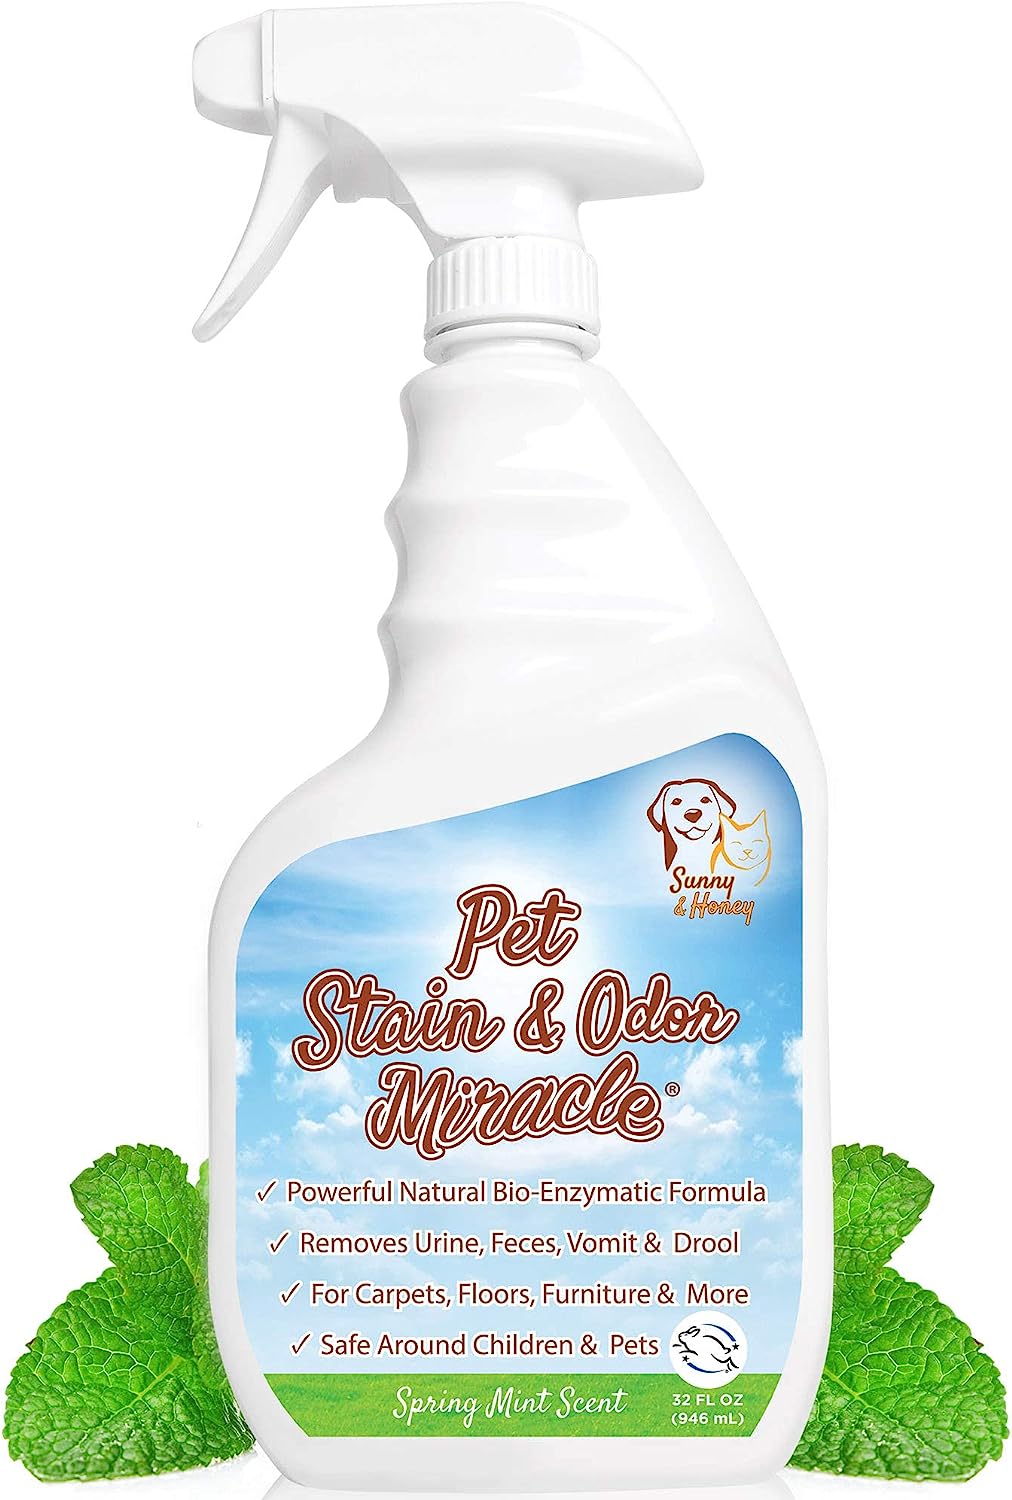 Sunny & Honey Pet Stain & Odor Miracle - Enzyme [...]